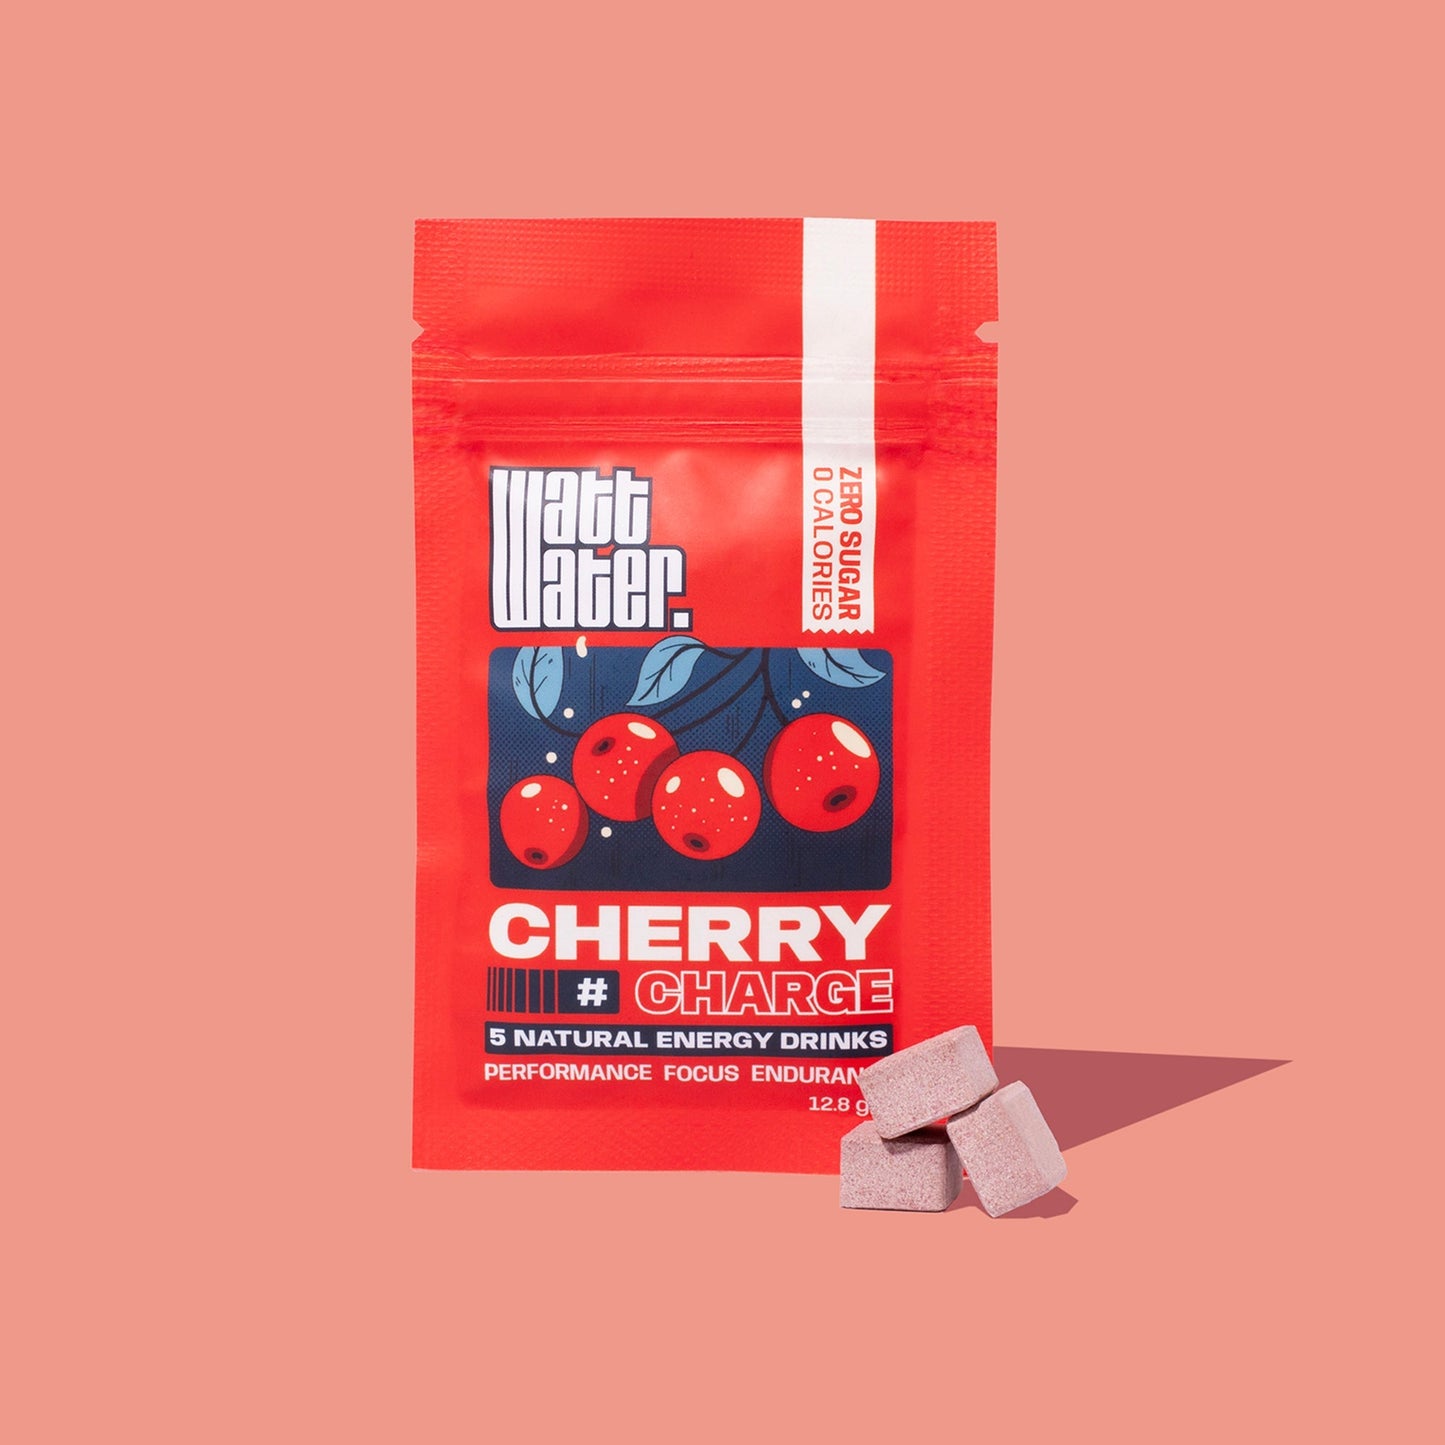 Cherry charge pack